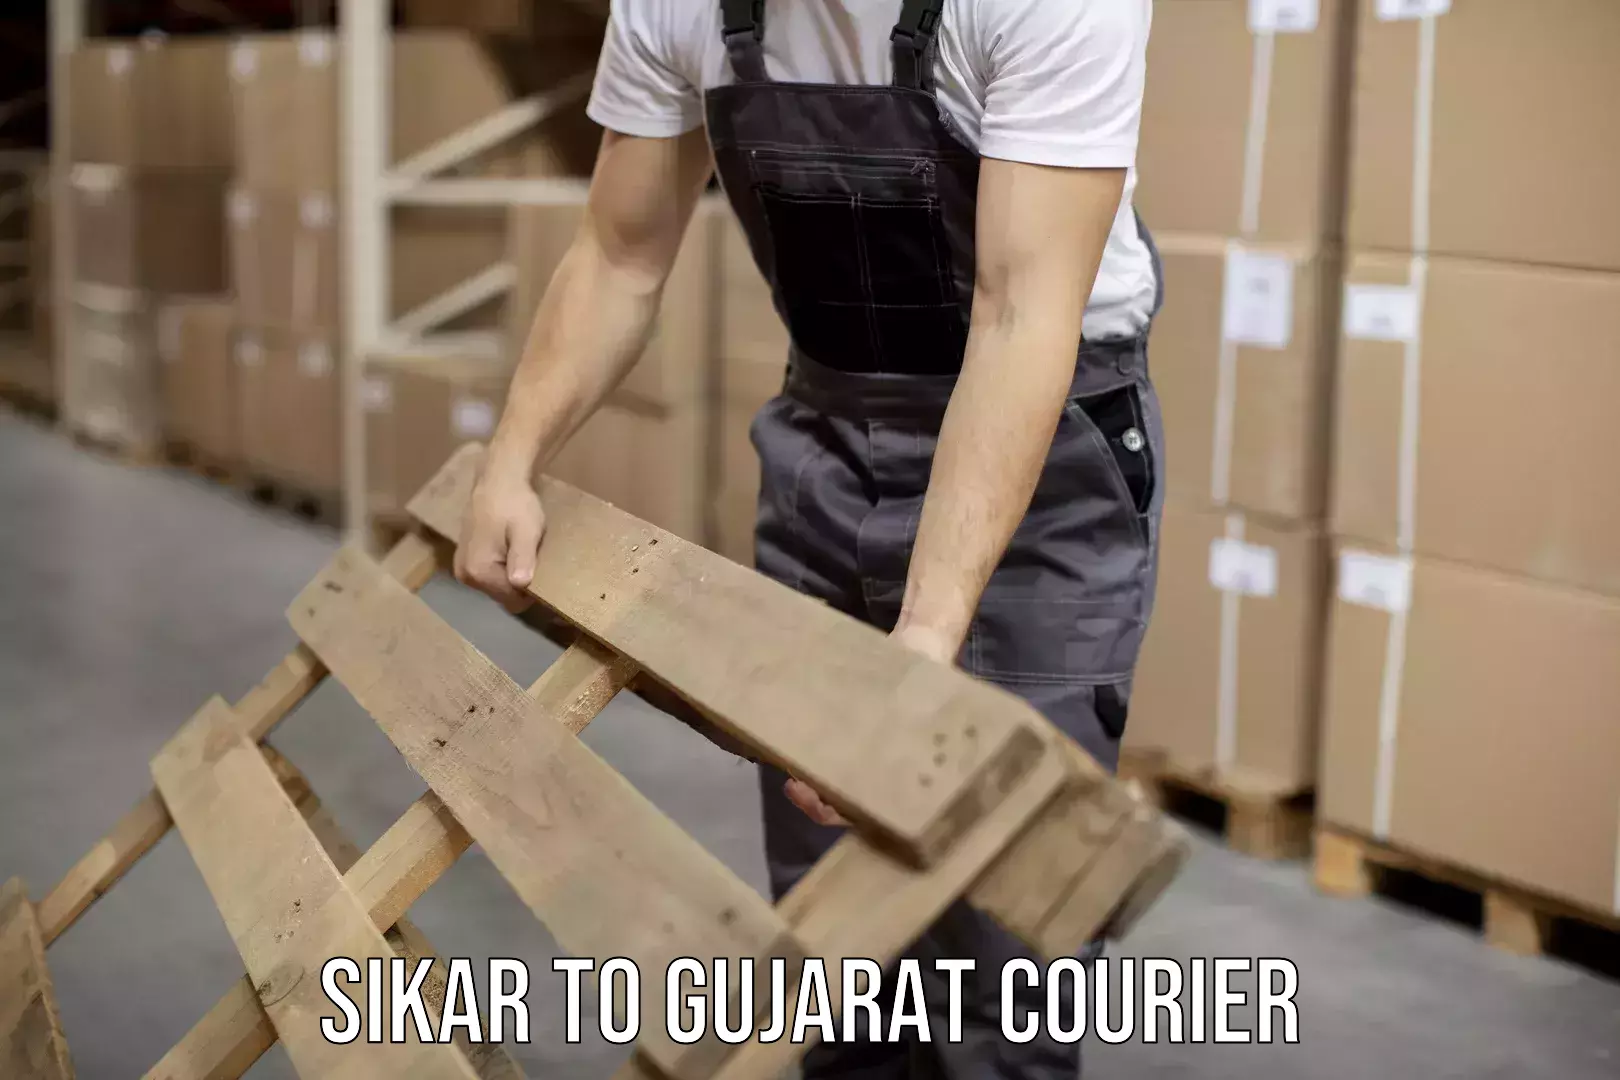 Full-service courier options Sikar to Jasdan